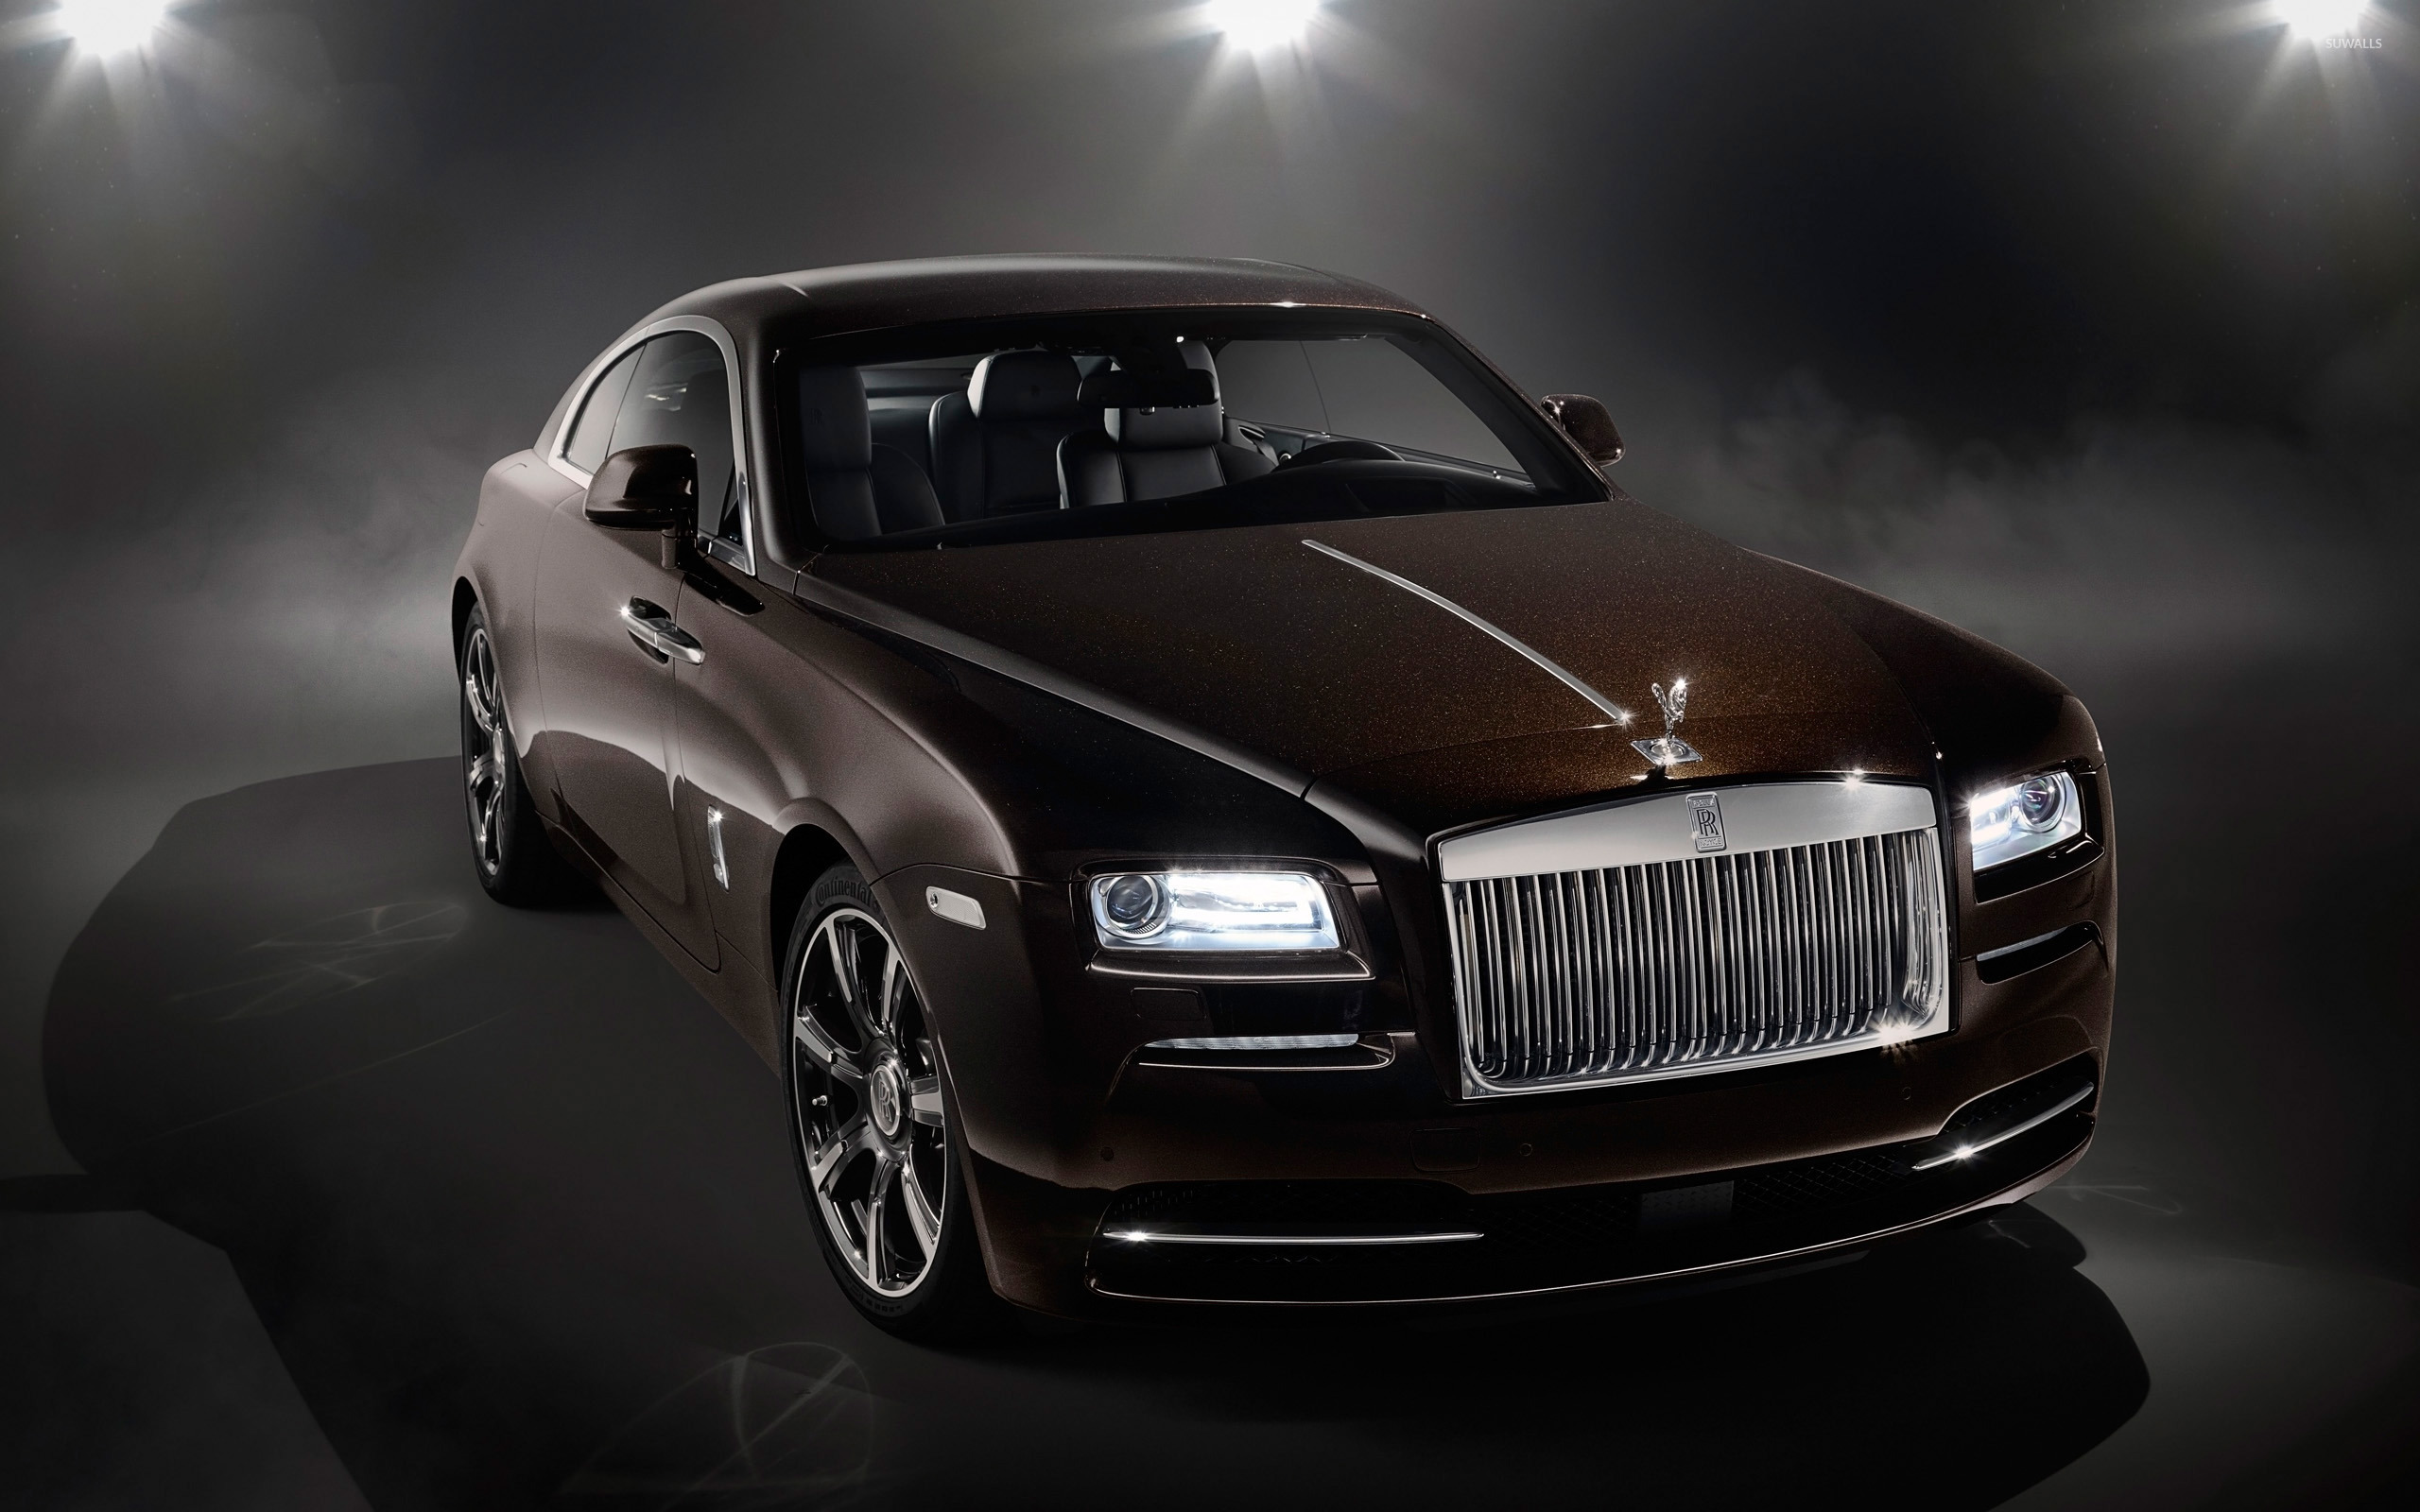 Sparkly Rolls-Royce Wraith wallpaper - Car wallpapers - #50569